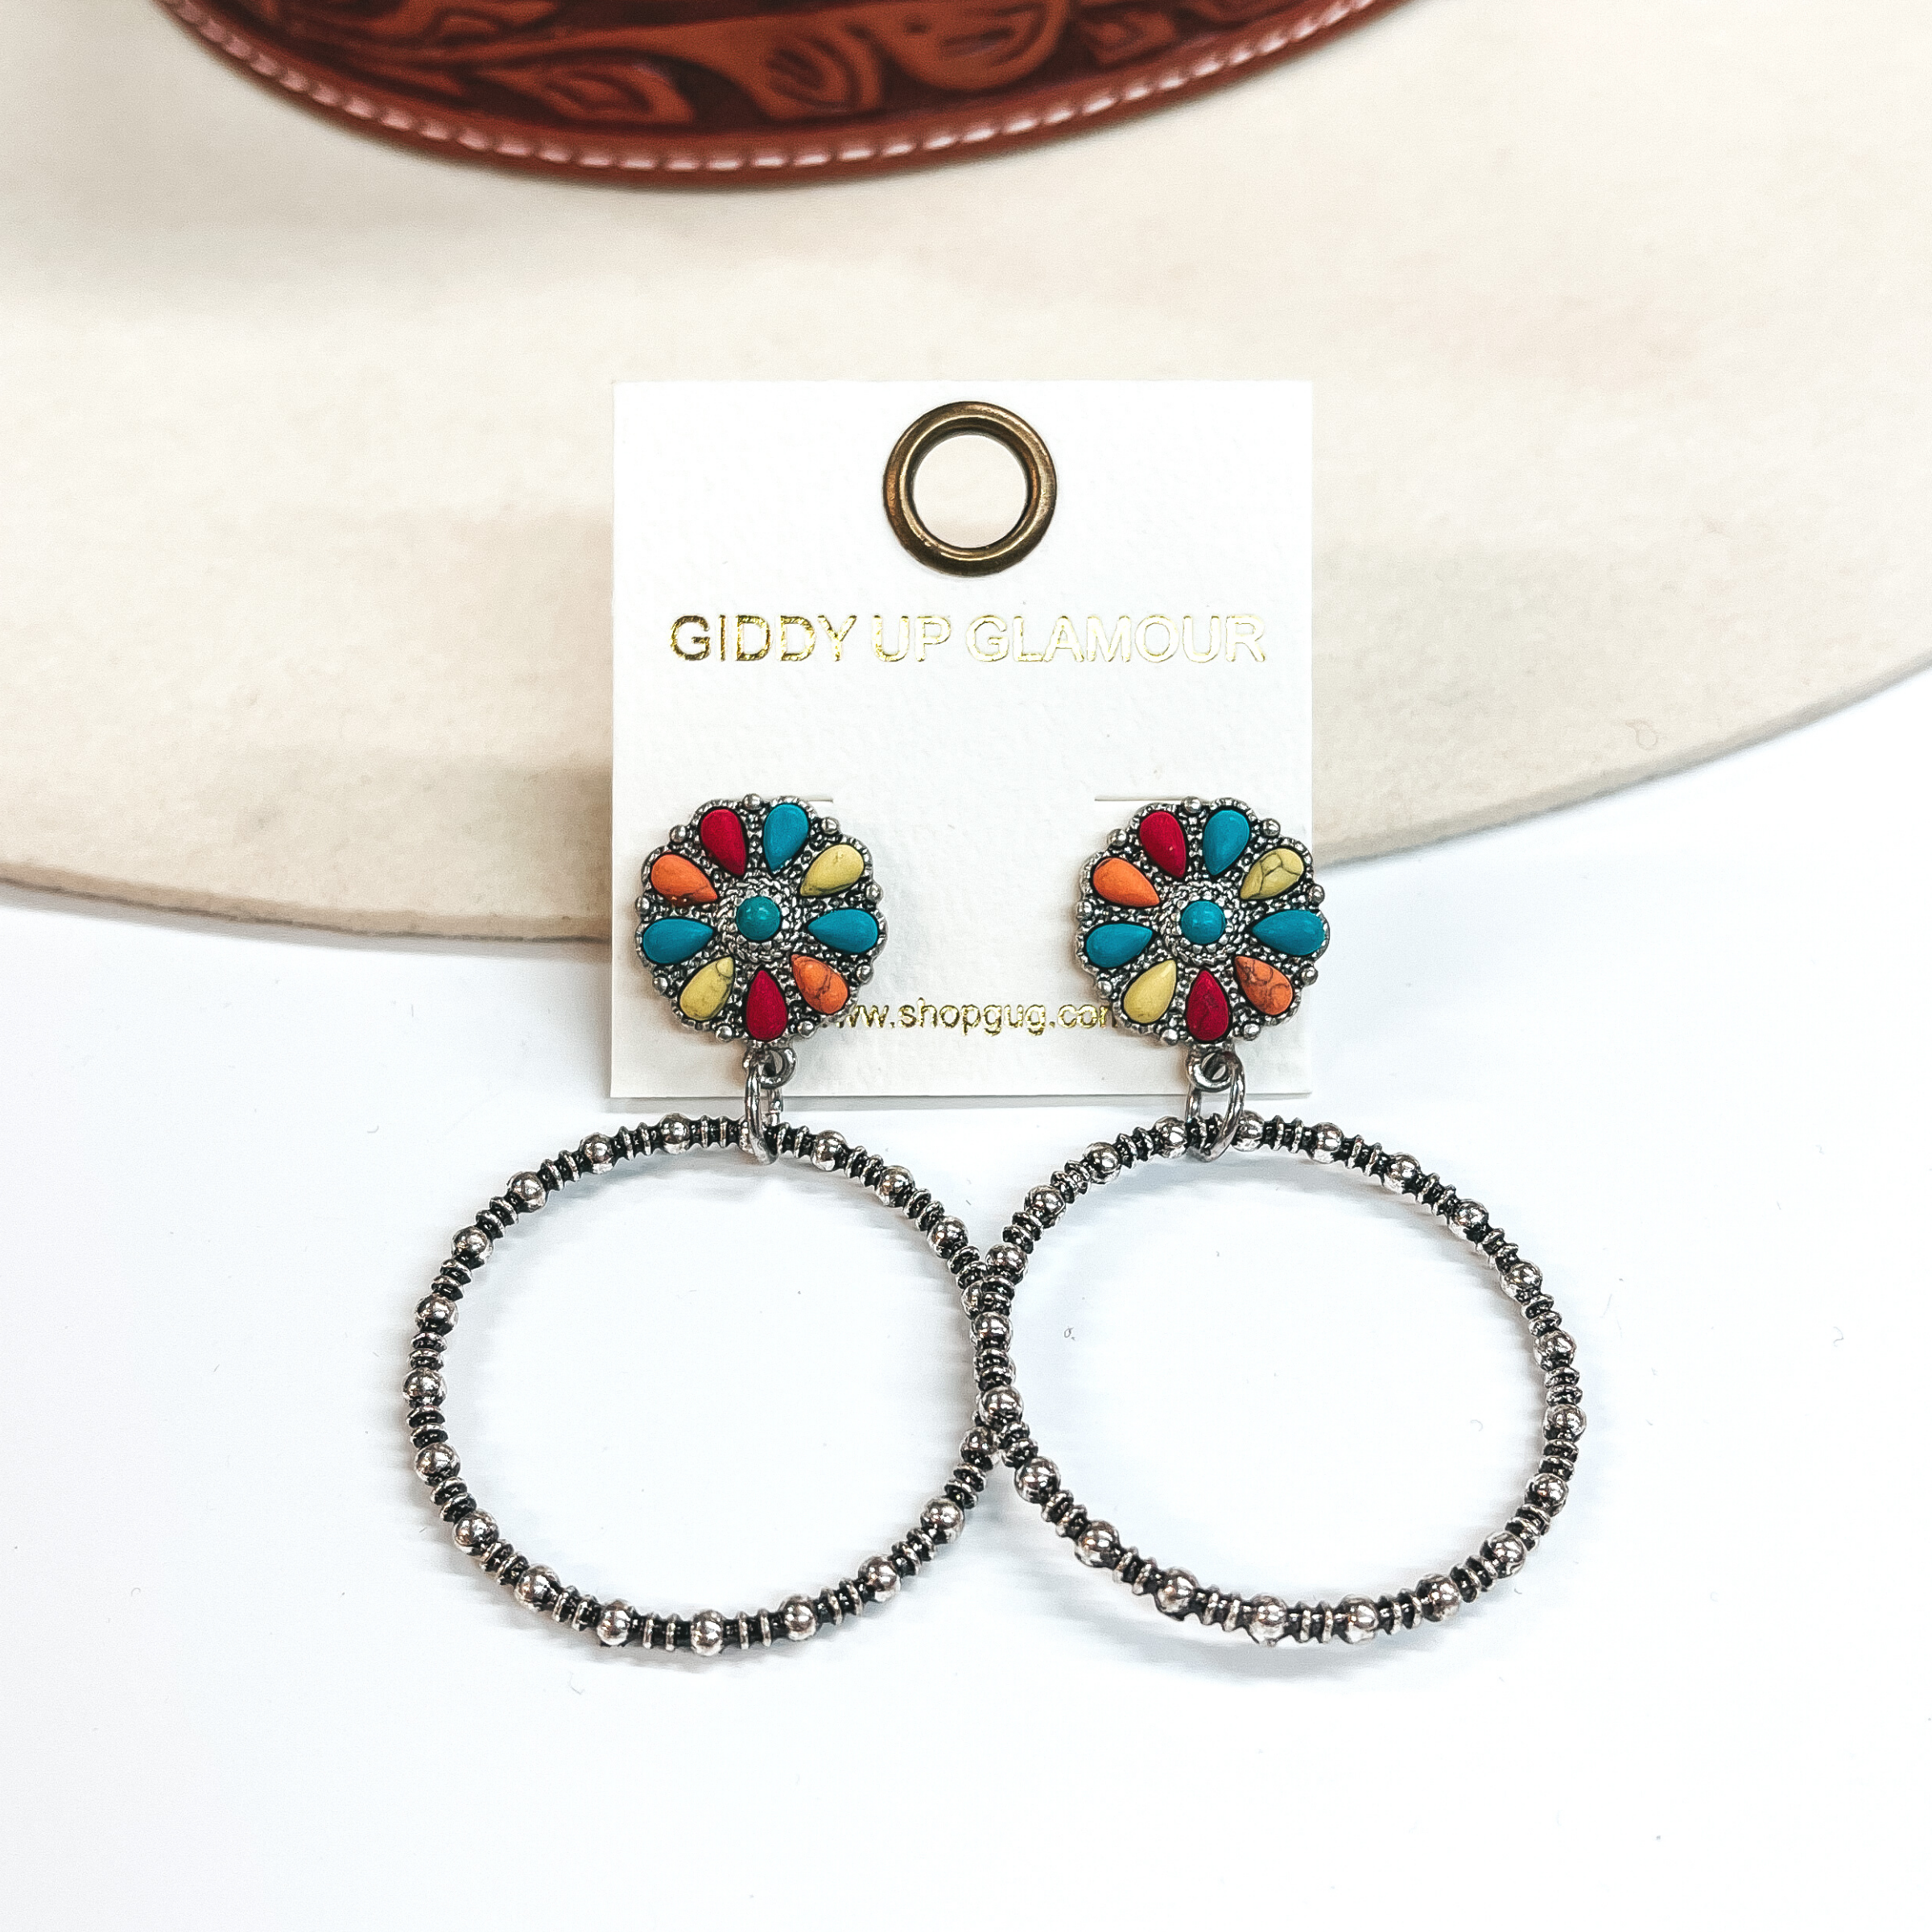 These are circle cluster post earrings with a silver  circle drop. The circle cluster has a mix of faux  colored stones in turquoise, yellow, red, and  orange. These earrings are taken on a white  background and leaned up against an ivory hat.